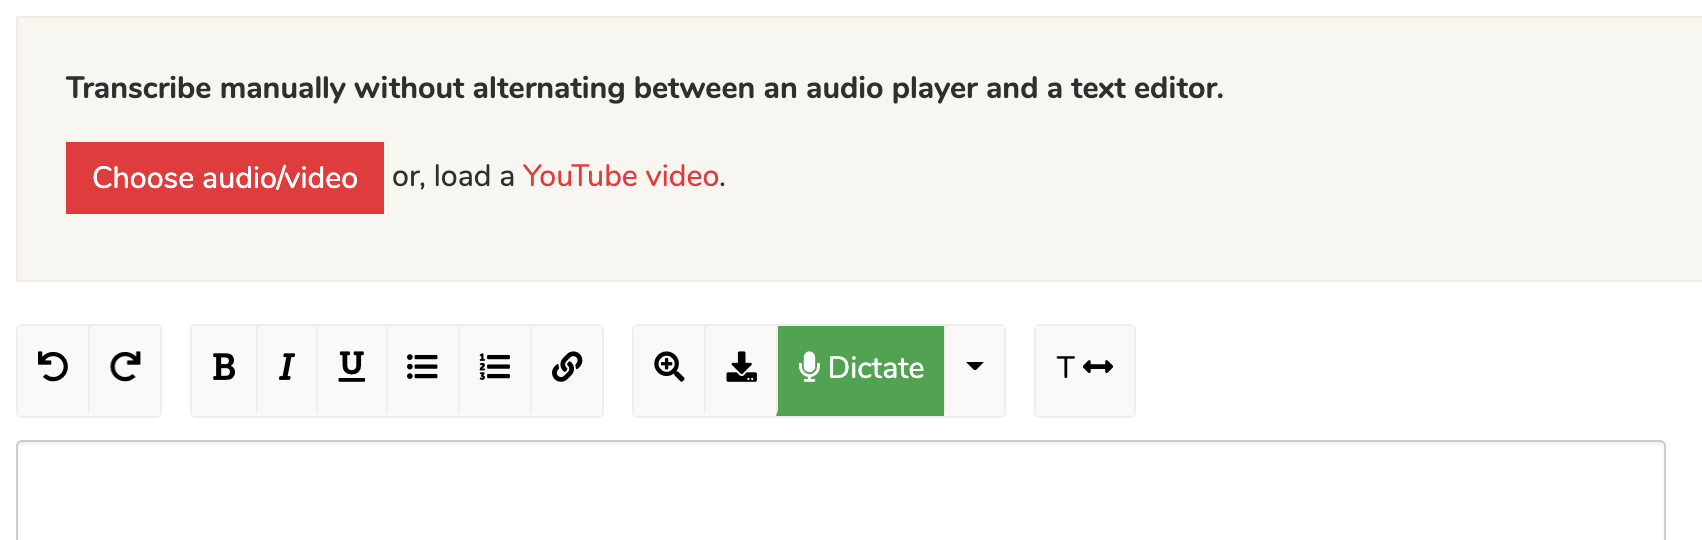 Choose an audio or video video for self transcription